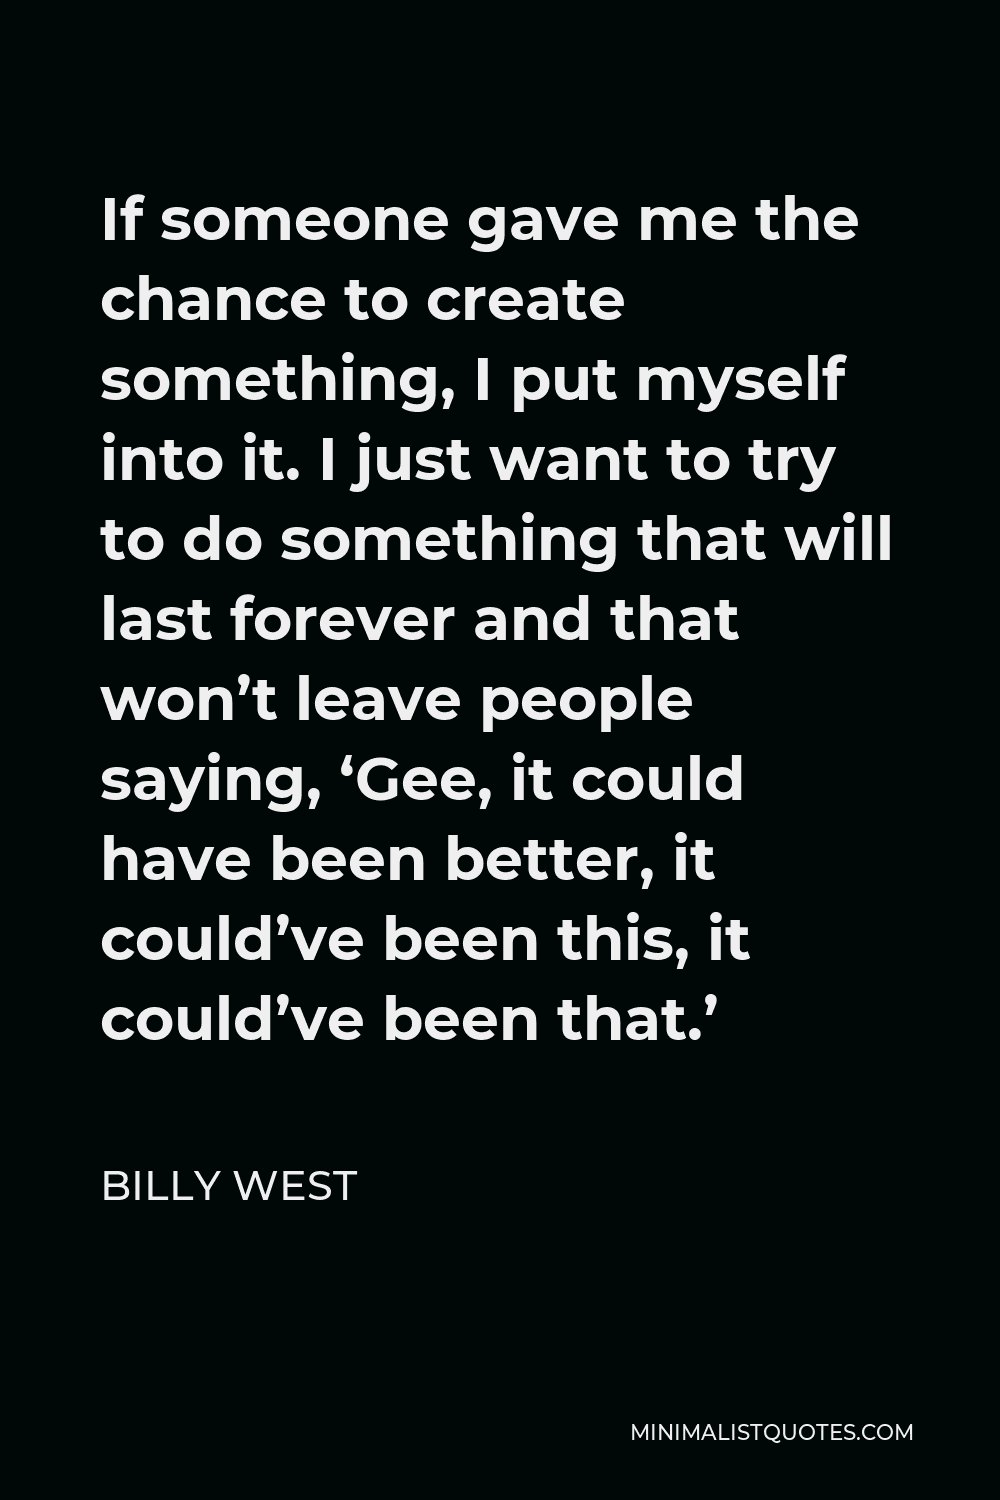 Billy West Quote - If someone gave me the chance to create something, I put myself into it. I just want to try to do something that will last forever and that won’t leave people saying, ‘Gee, it could have been better, it could’ve been this, it could’ve been that.’